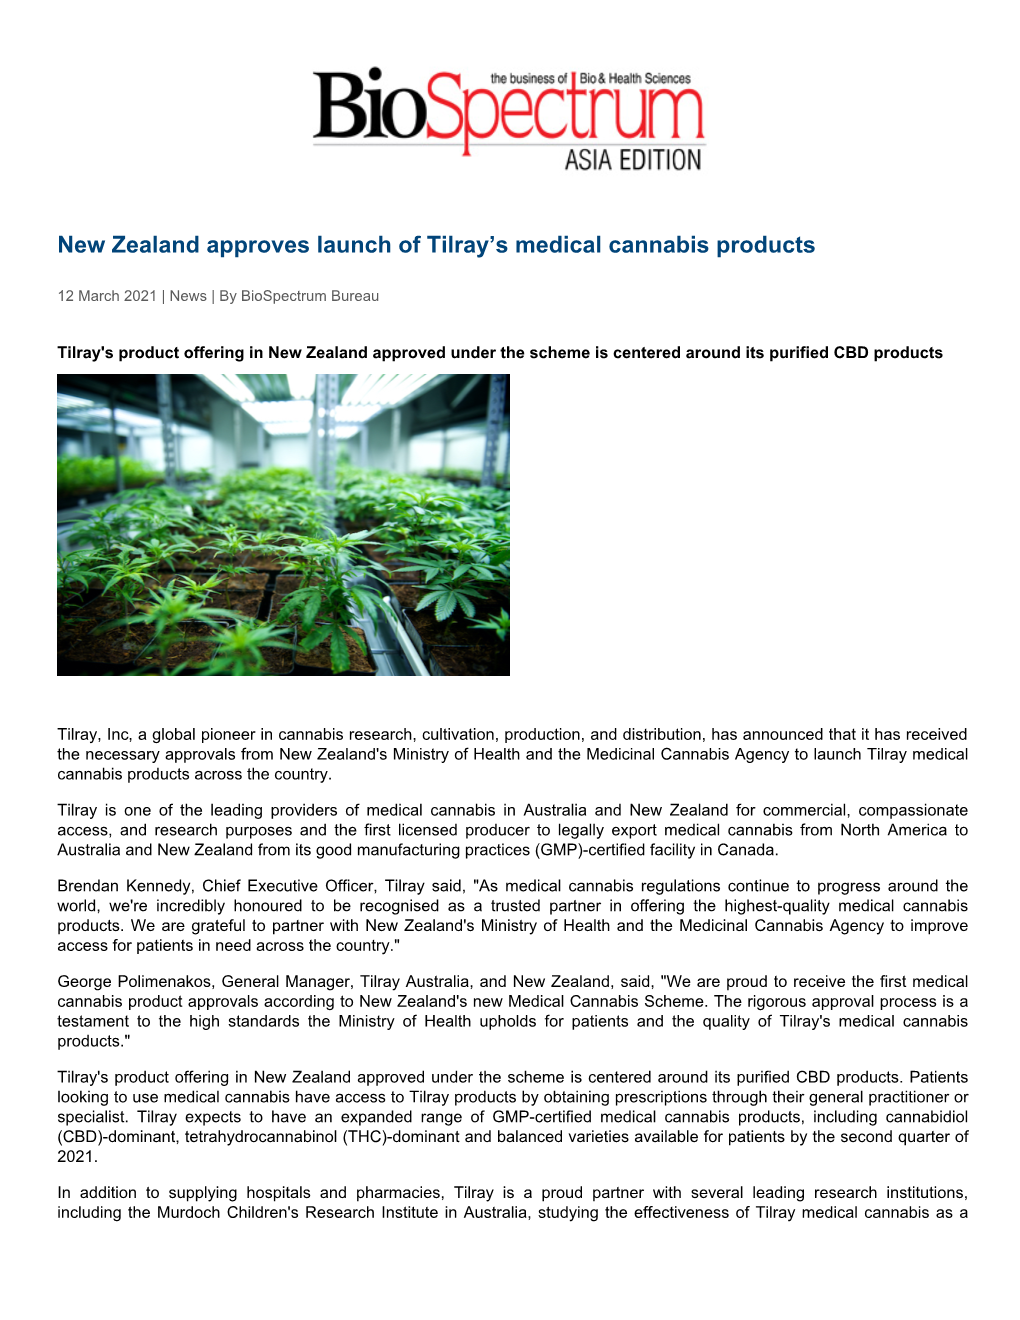 New Zealand Approves Launch of Tilray™S Medical Cannabis Products